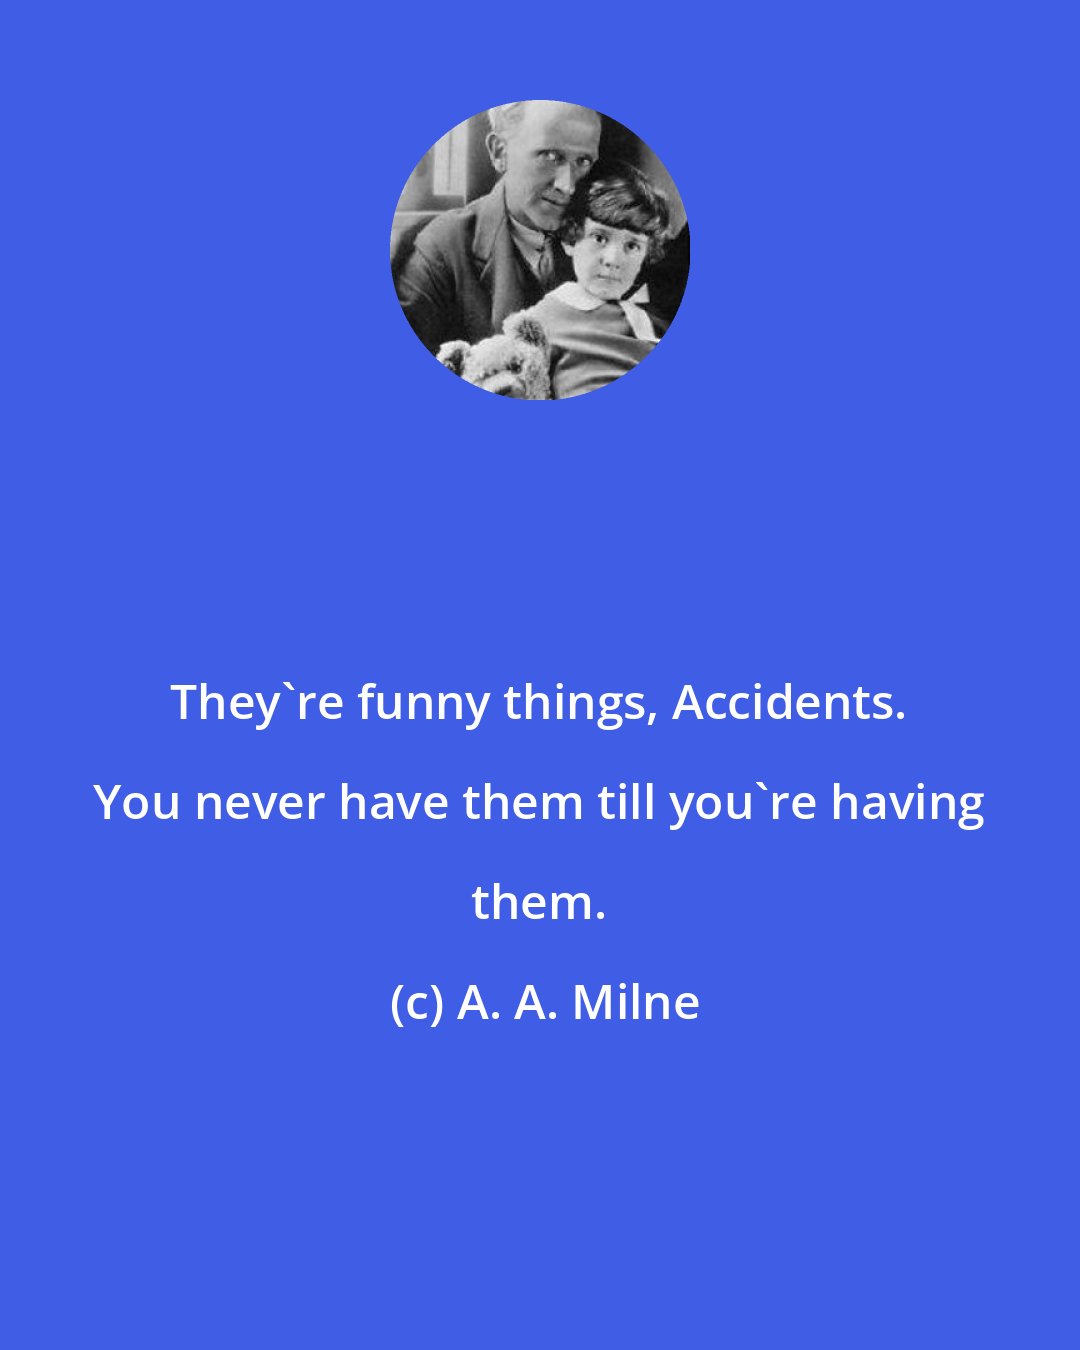 A. A. Milne: They're funny things, Accidents. You never have them till you're having them.